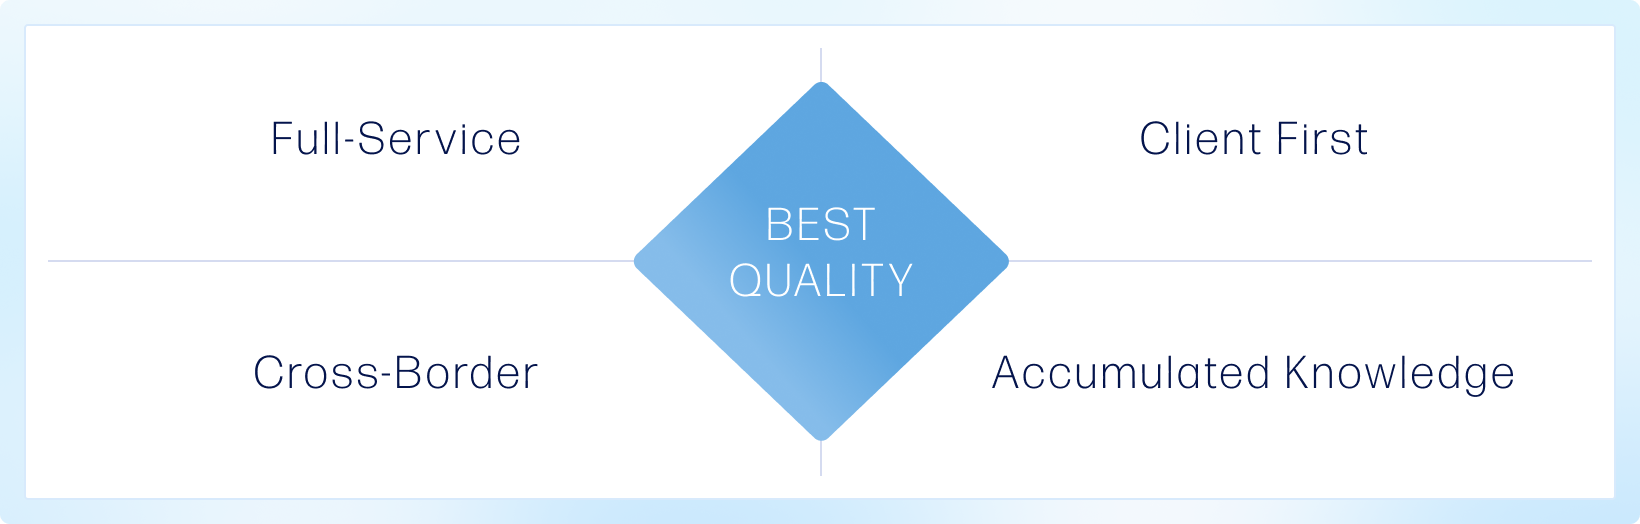 BEST QUALITY: Full-Service,Client First,Cross-Border,Accumulated Knowledge